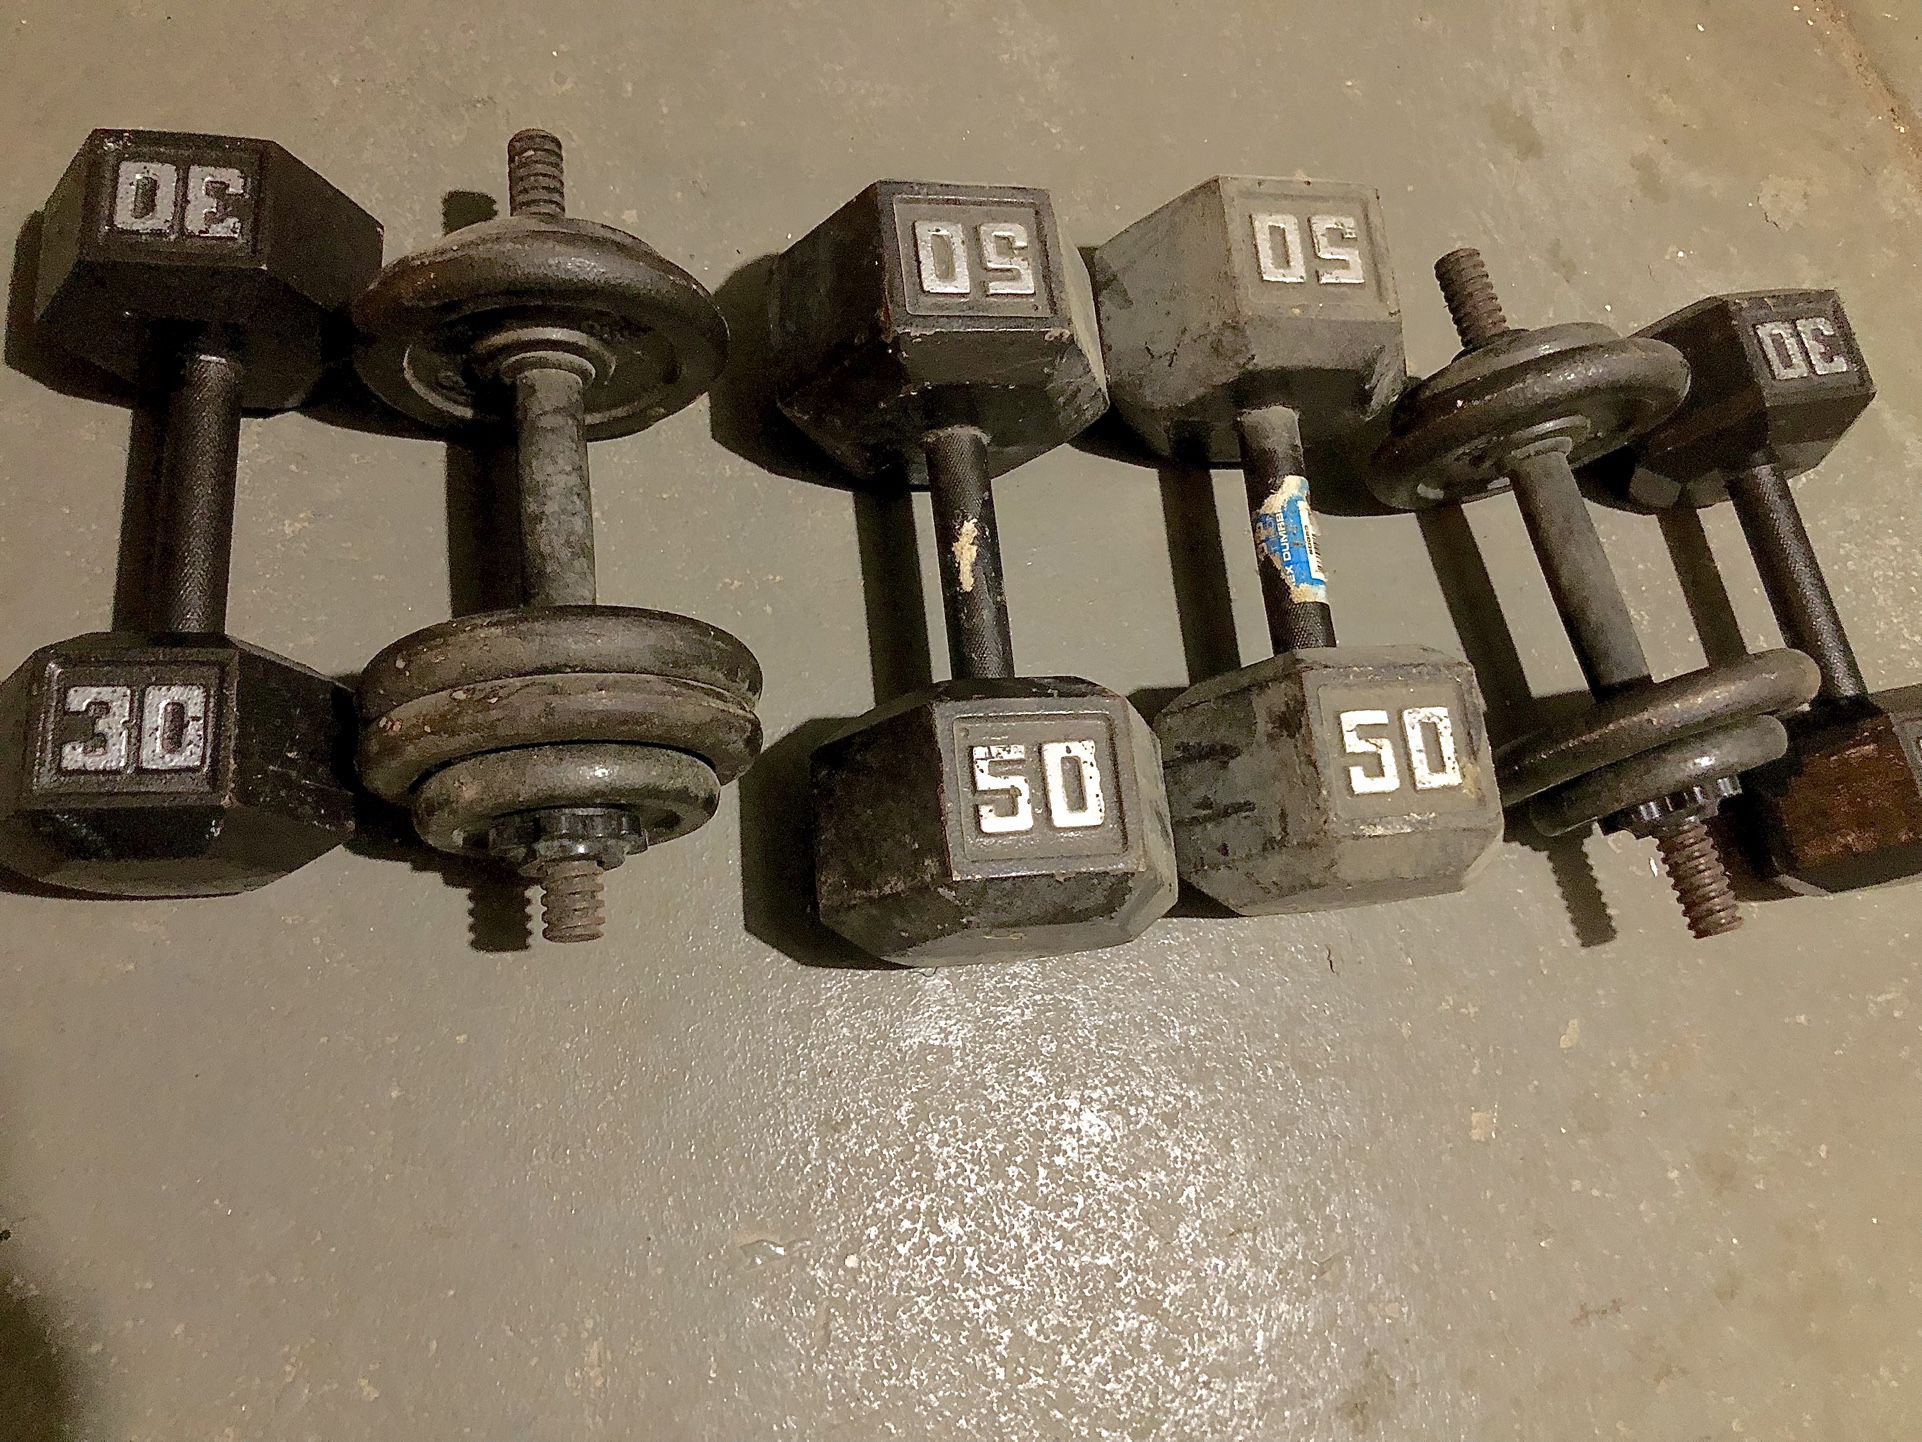 Weights For Sale 